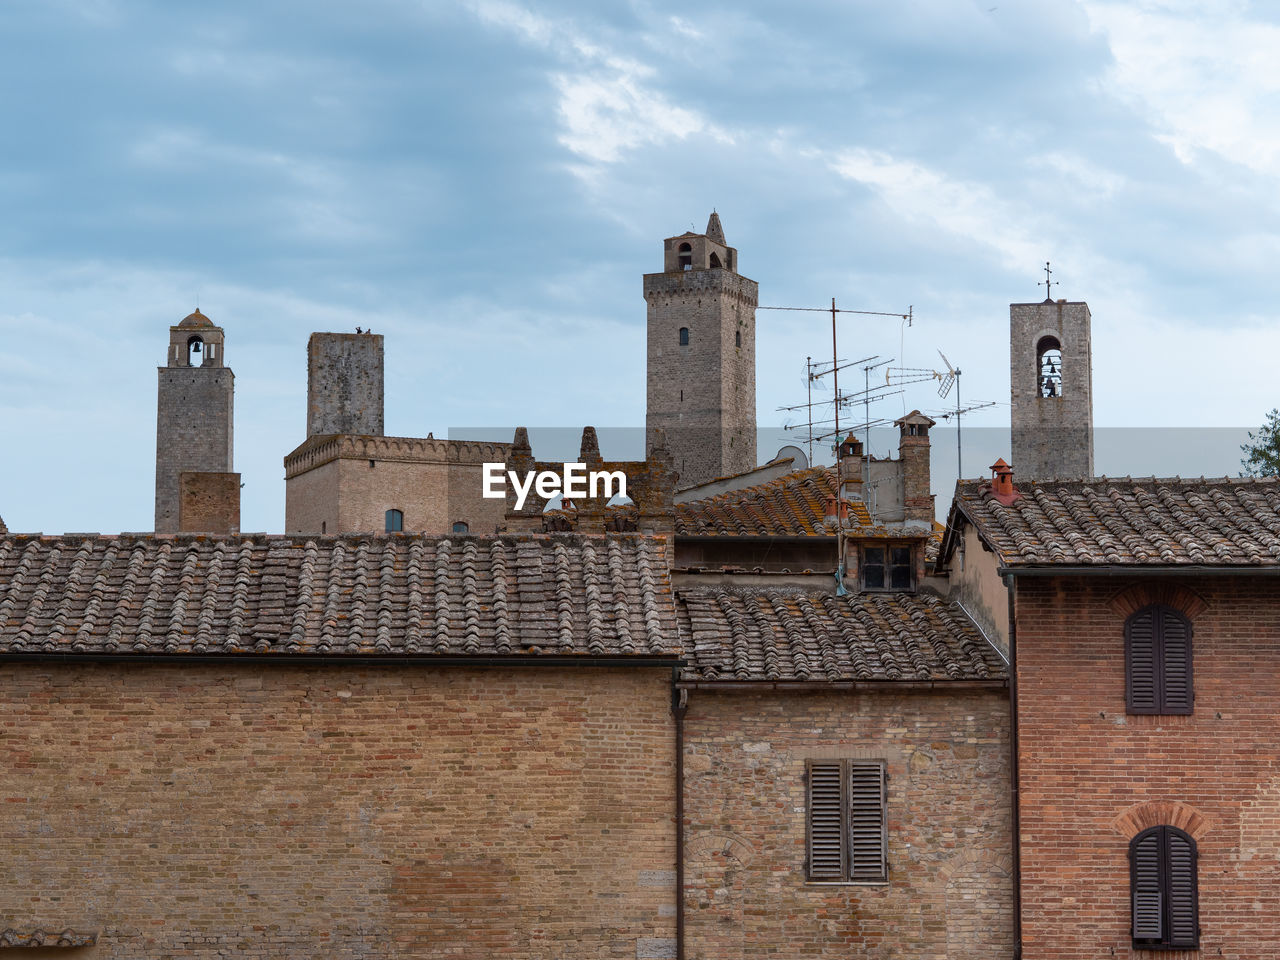 Details of bell towers and brick houses in san gimignano in tuscany, siena - italy.